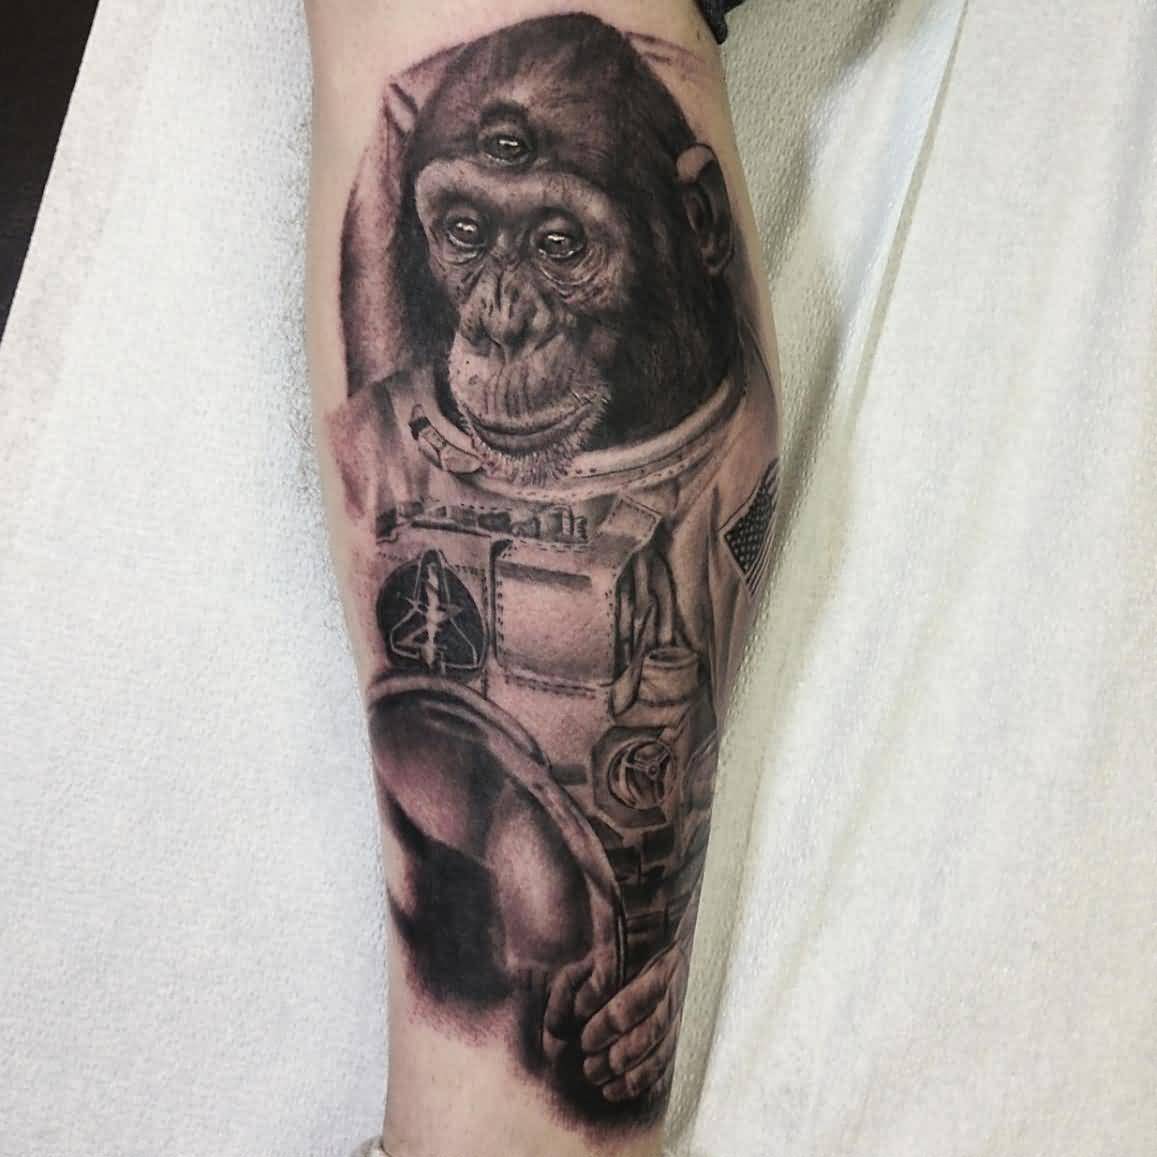 Realistic Chimpanzee Tattoo On Forearm by Anthony